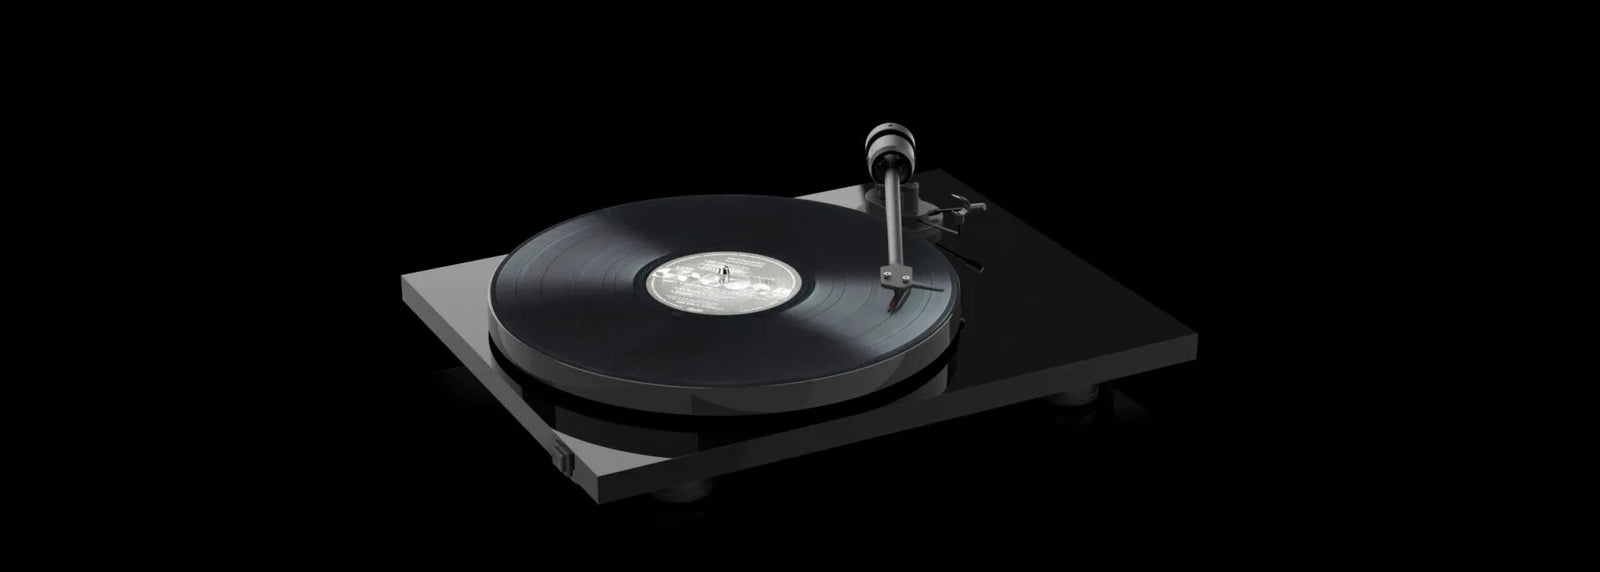 The Project E1 is available at Vinyl Sound. Get the best price on all Project Audio: The Project E1 - Pro-ject DEBUT PRO S Turntables X1 - X8 - X2 – Pro-ject 6 PerspeX SB - RPM 1 Carbon - RPM 10 Carbon – Xtension 12 Evolution... Pro-ject HiFi Electronics Phono Preamplifier · Vinyl Recording · Pro-ject Preamplifier – Pro-ject Phono Box...